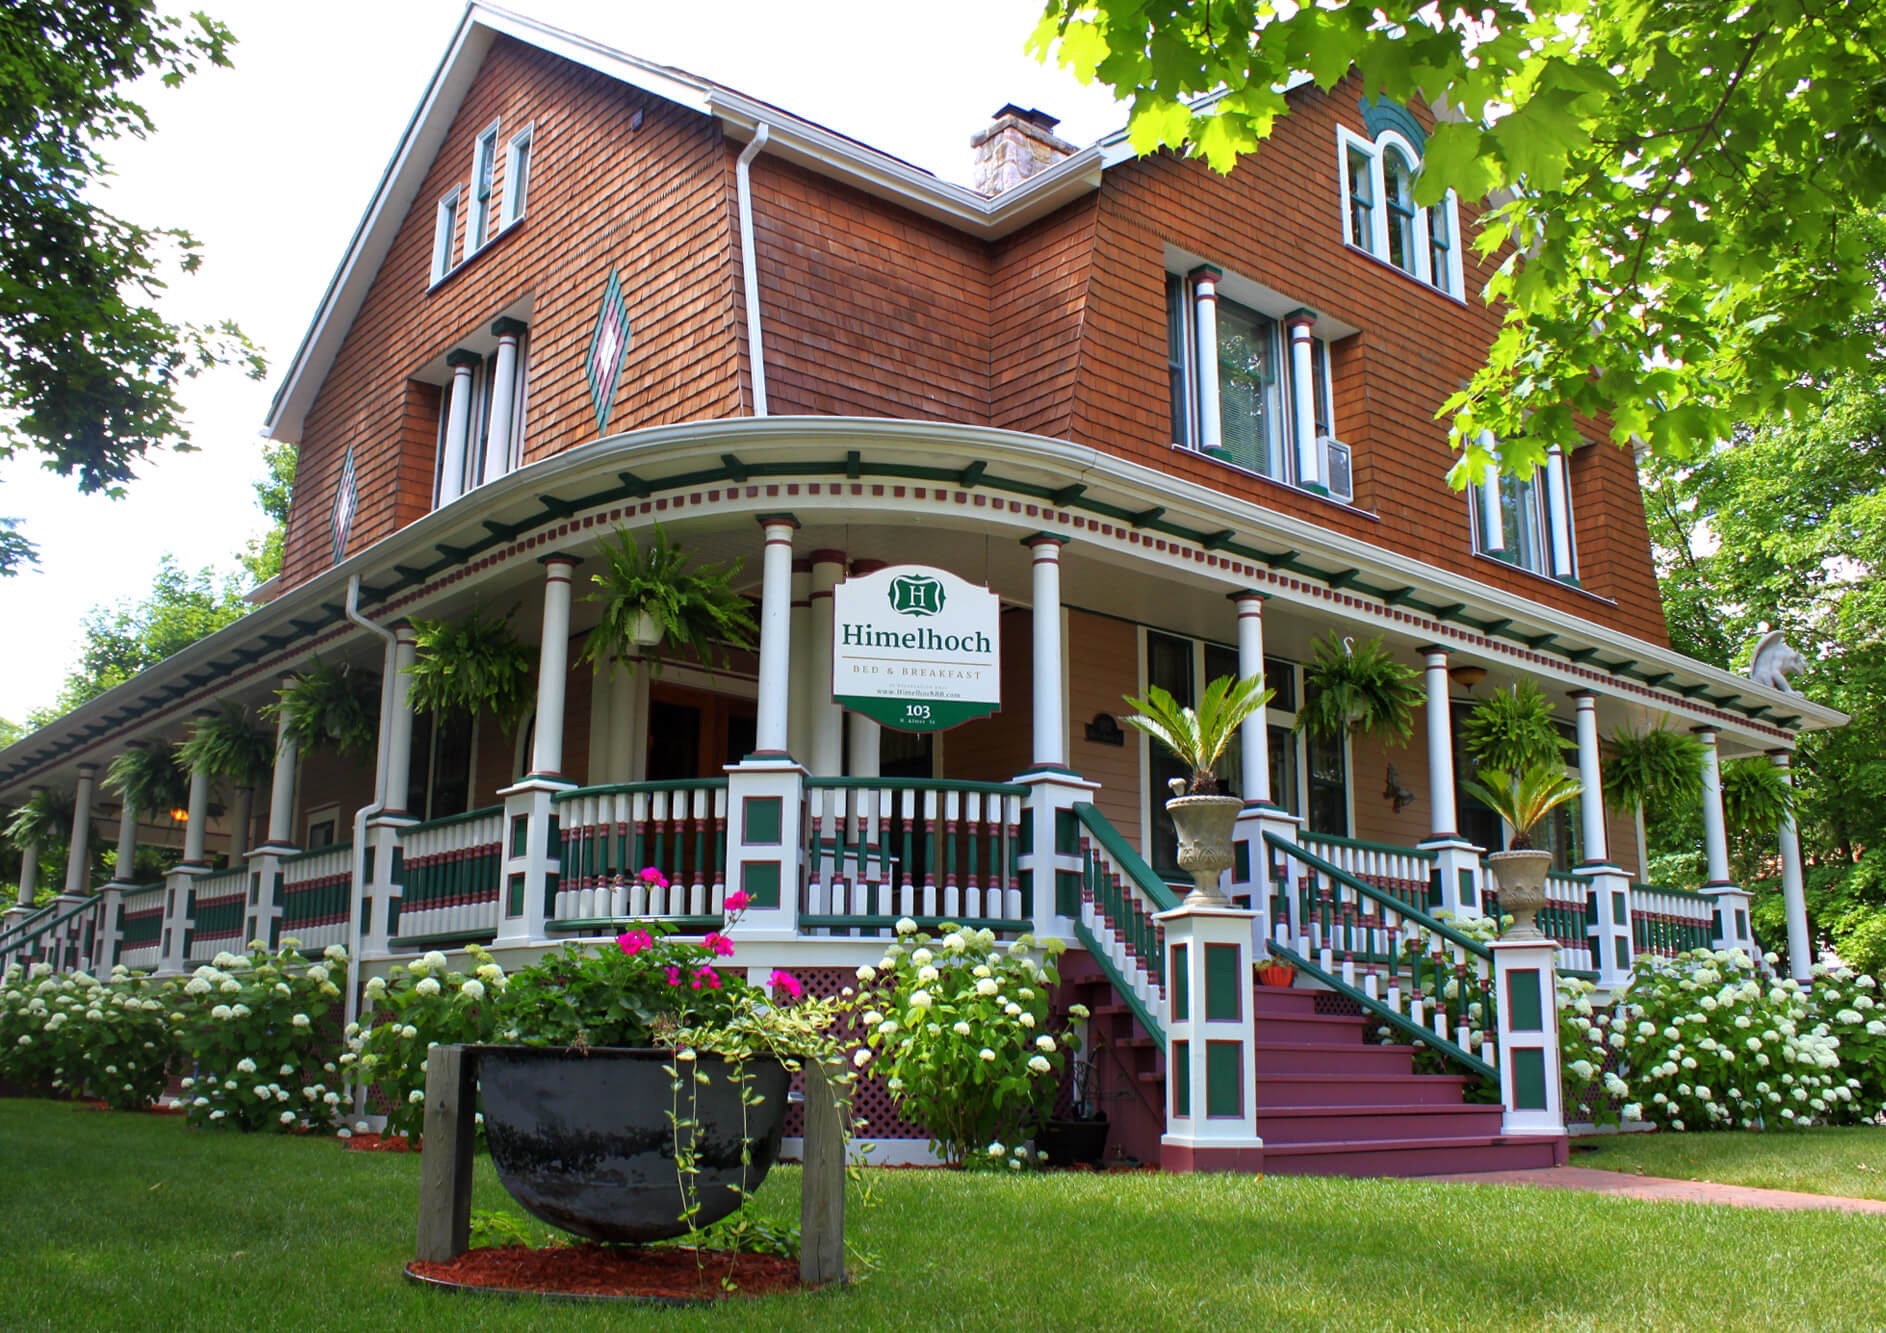 Himelhoch Bed and Breakfast - Michigan Bed And Breakfast ...